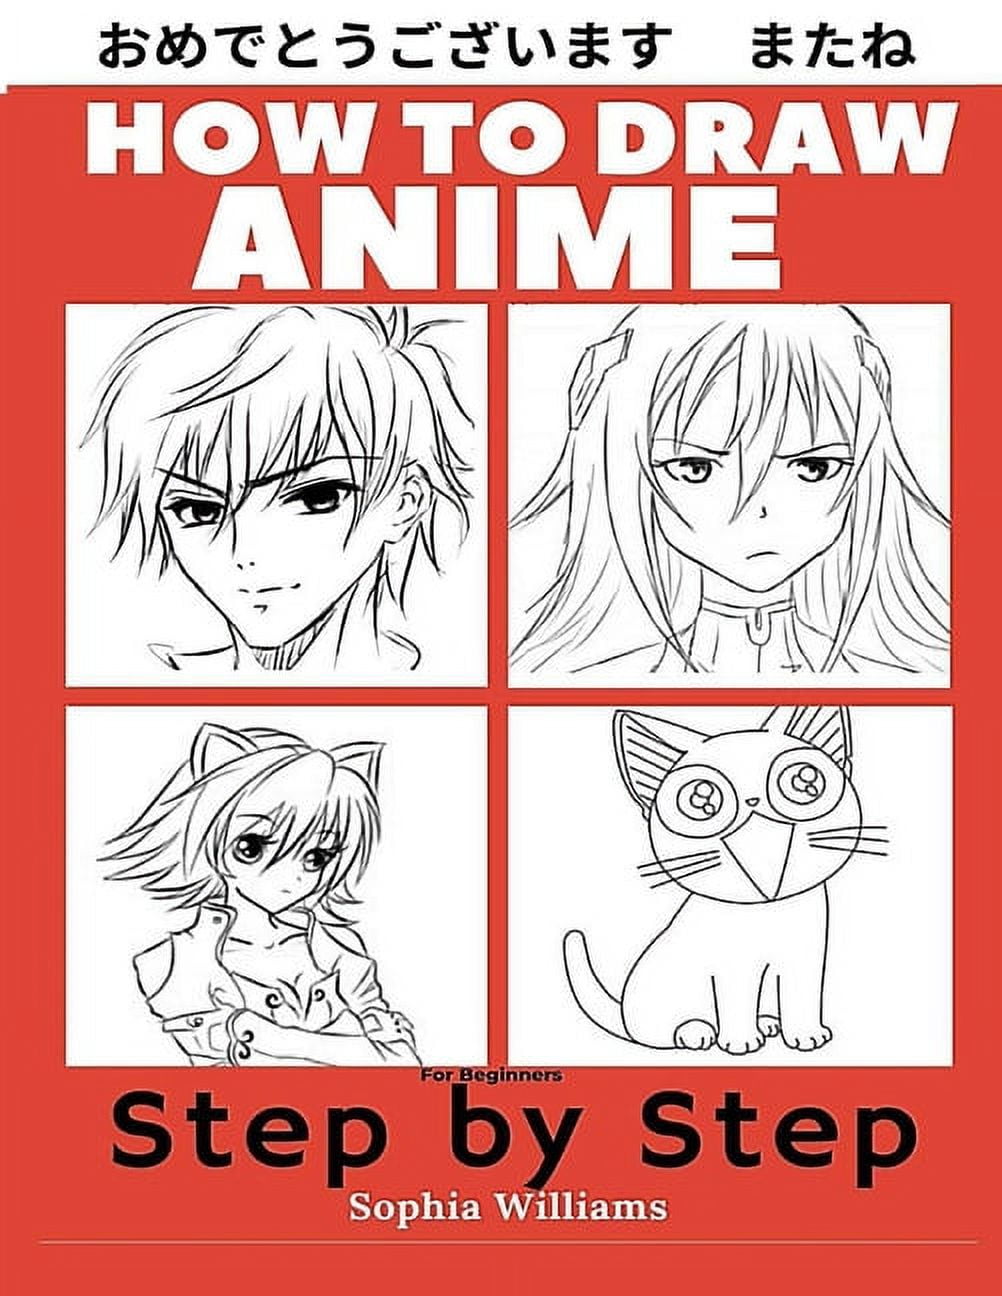 How to Draw Anime for Beginners Step by Step: Manga and Anime Drawing Tutorials Book 1 [Book]